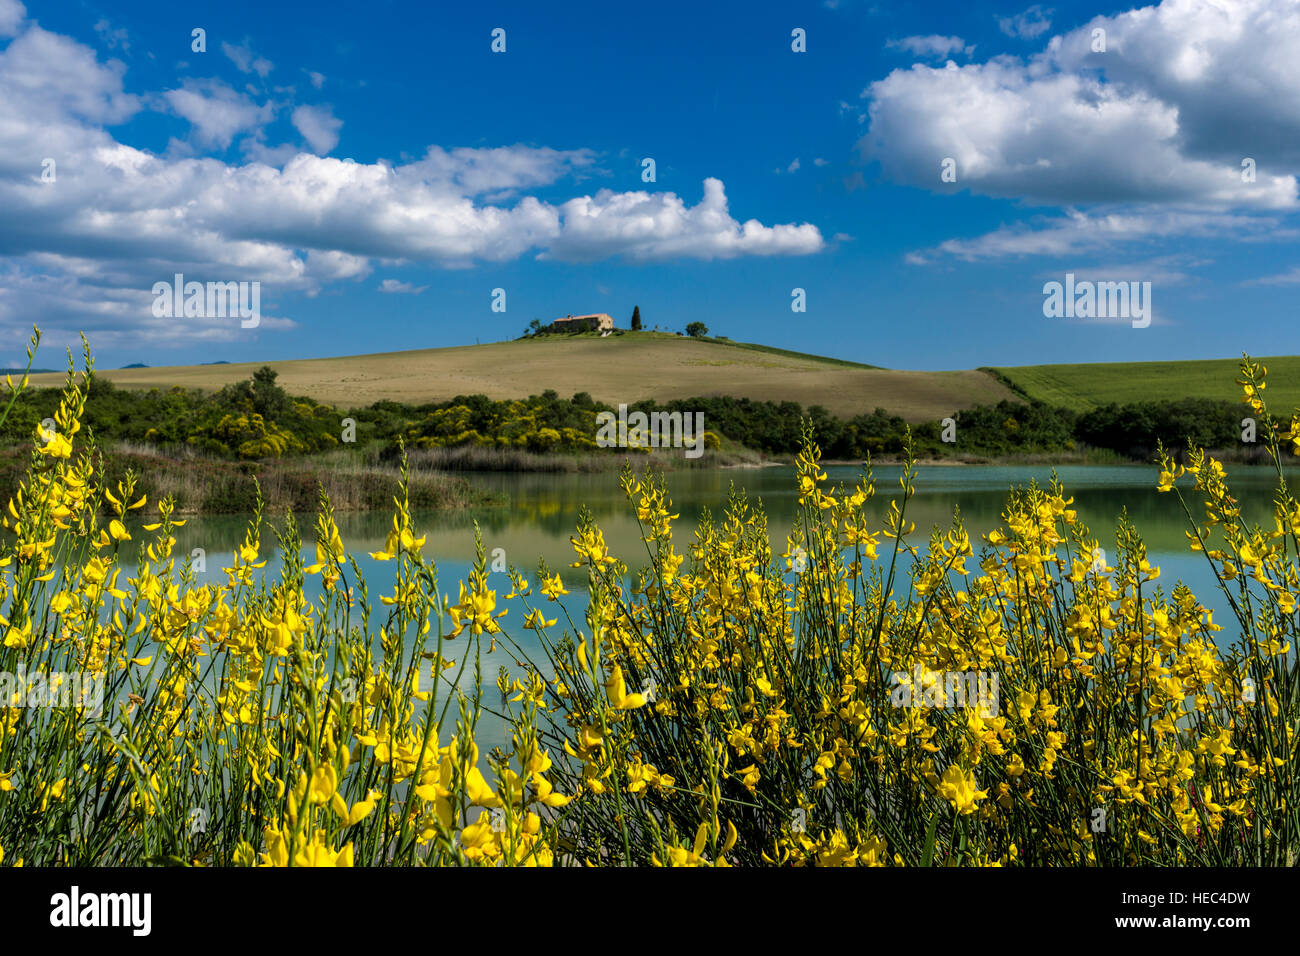 Typical green Tuscany landscape in Val d’Orcia with a farm on a hill, a lake, yellow broom bushes and blue cloudy sky Stock Photo